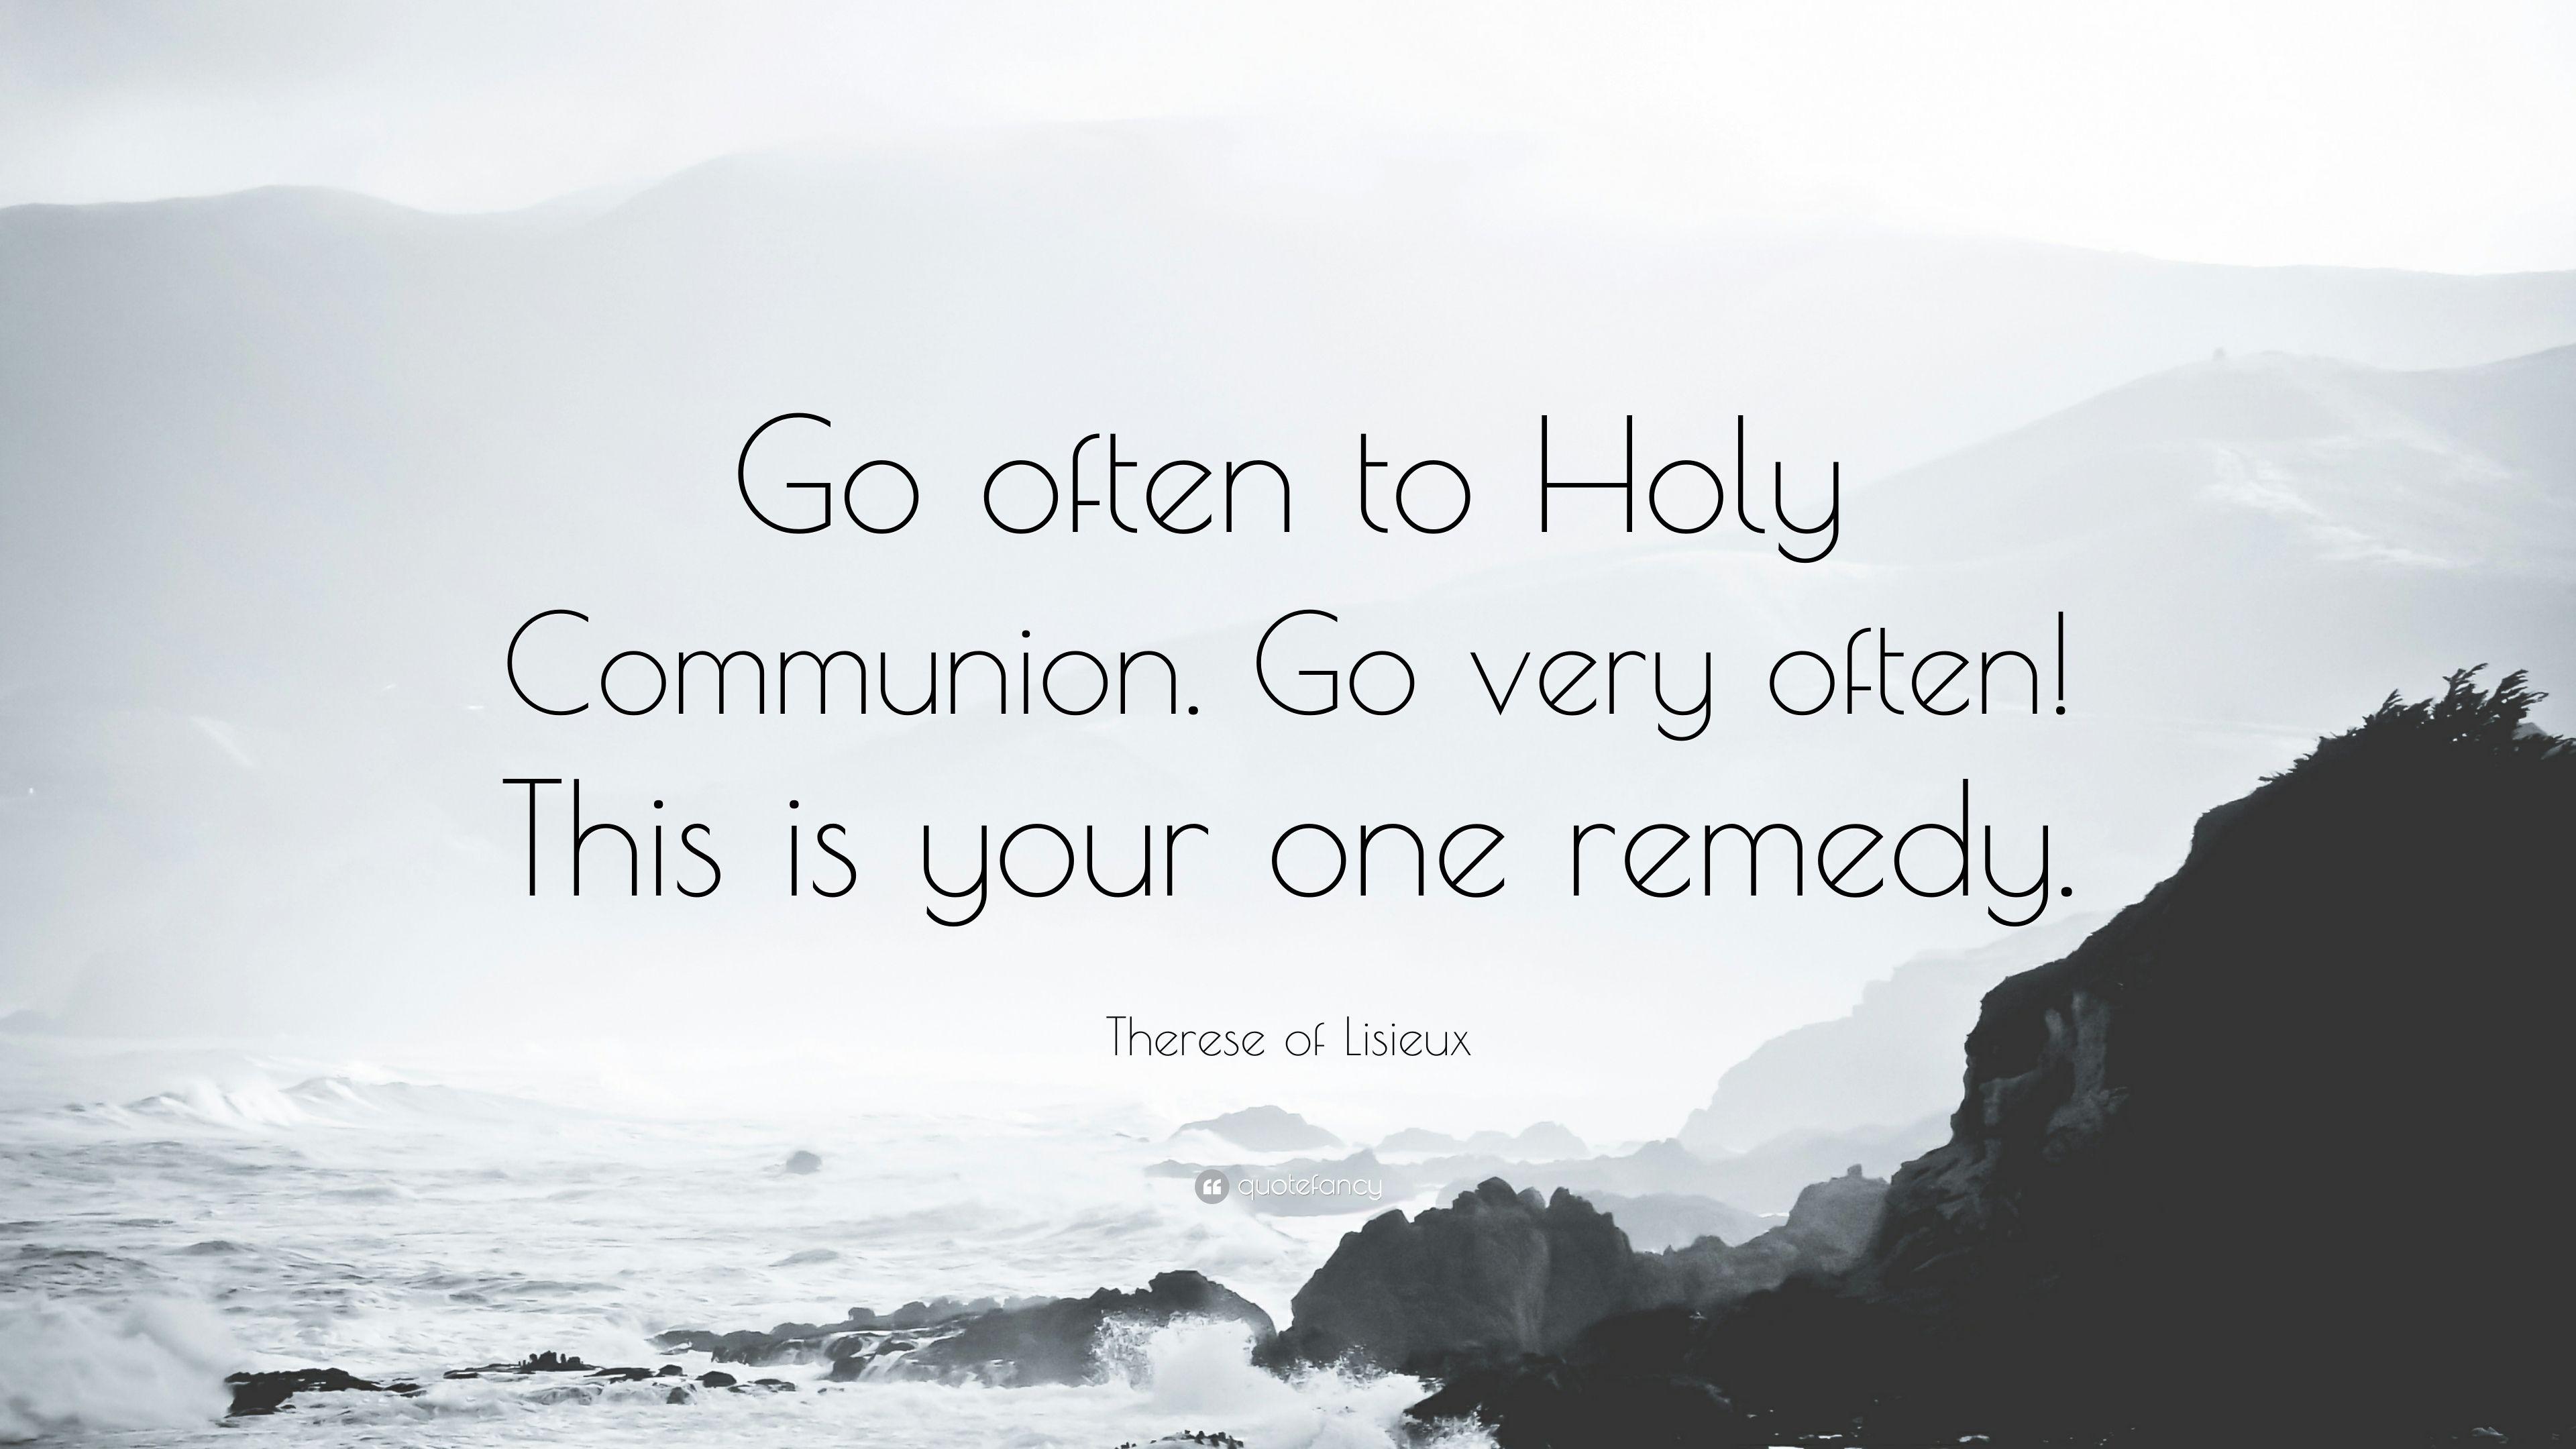 Therese of Lisieux Quote: “Go often to Holy Communion. Go very